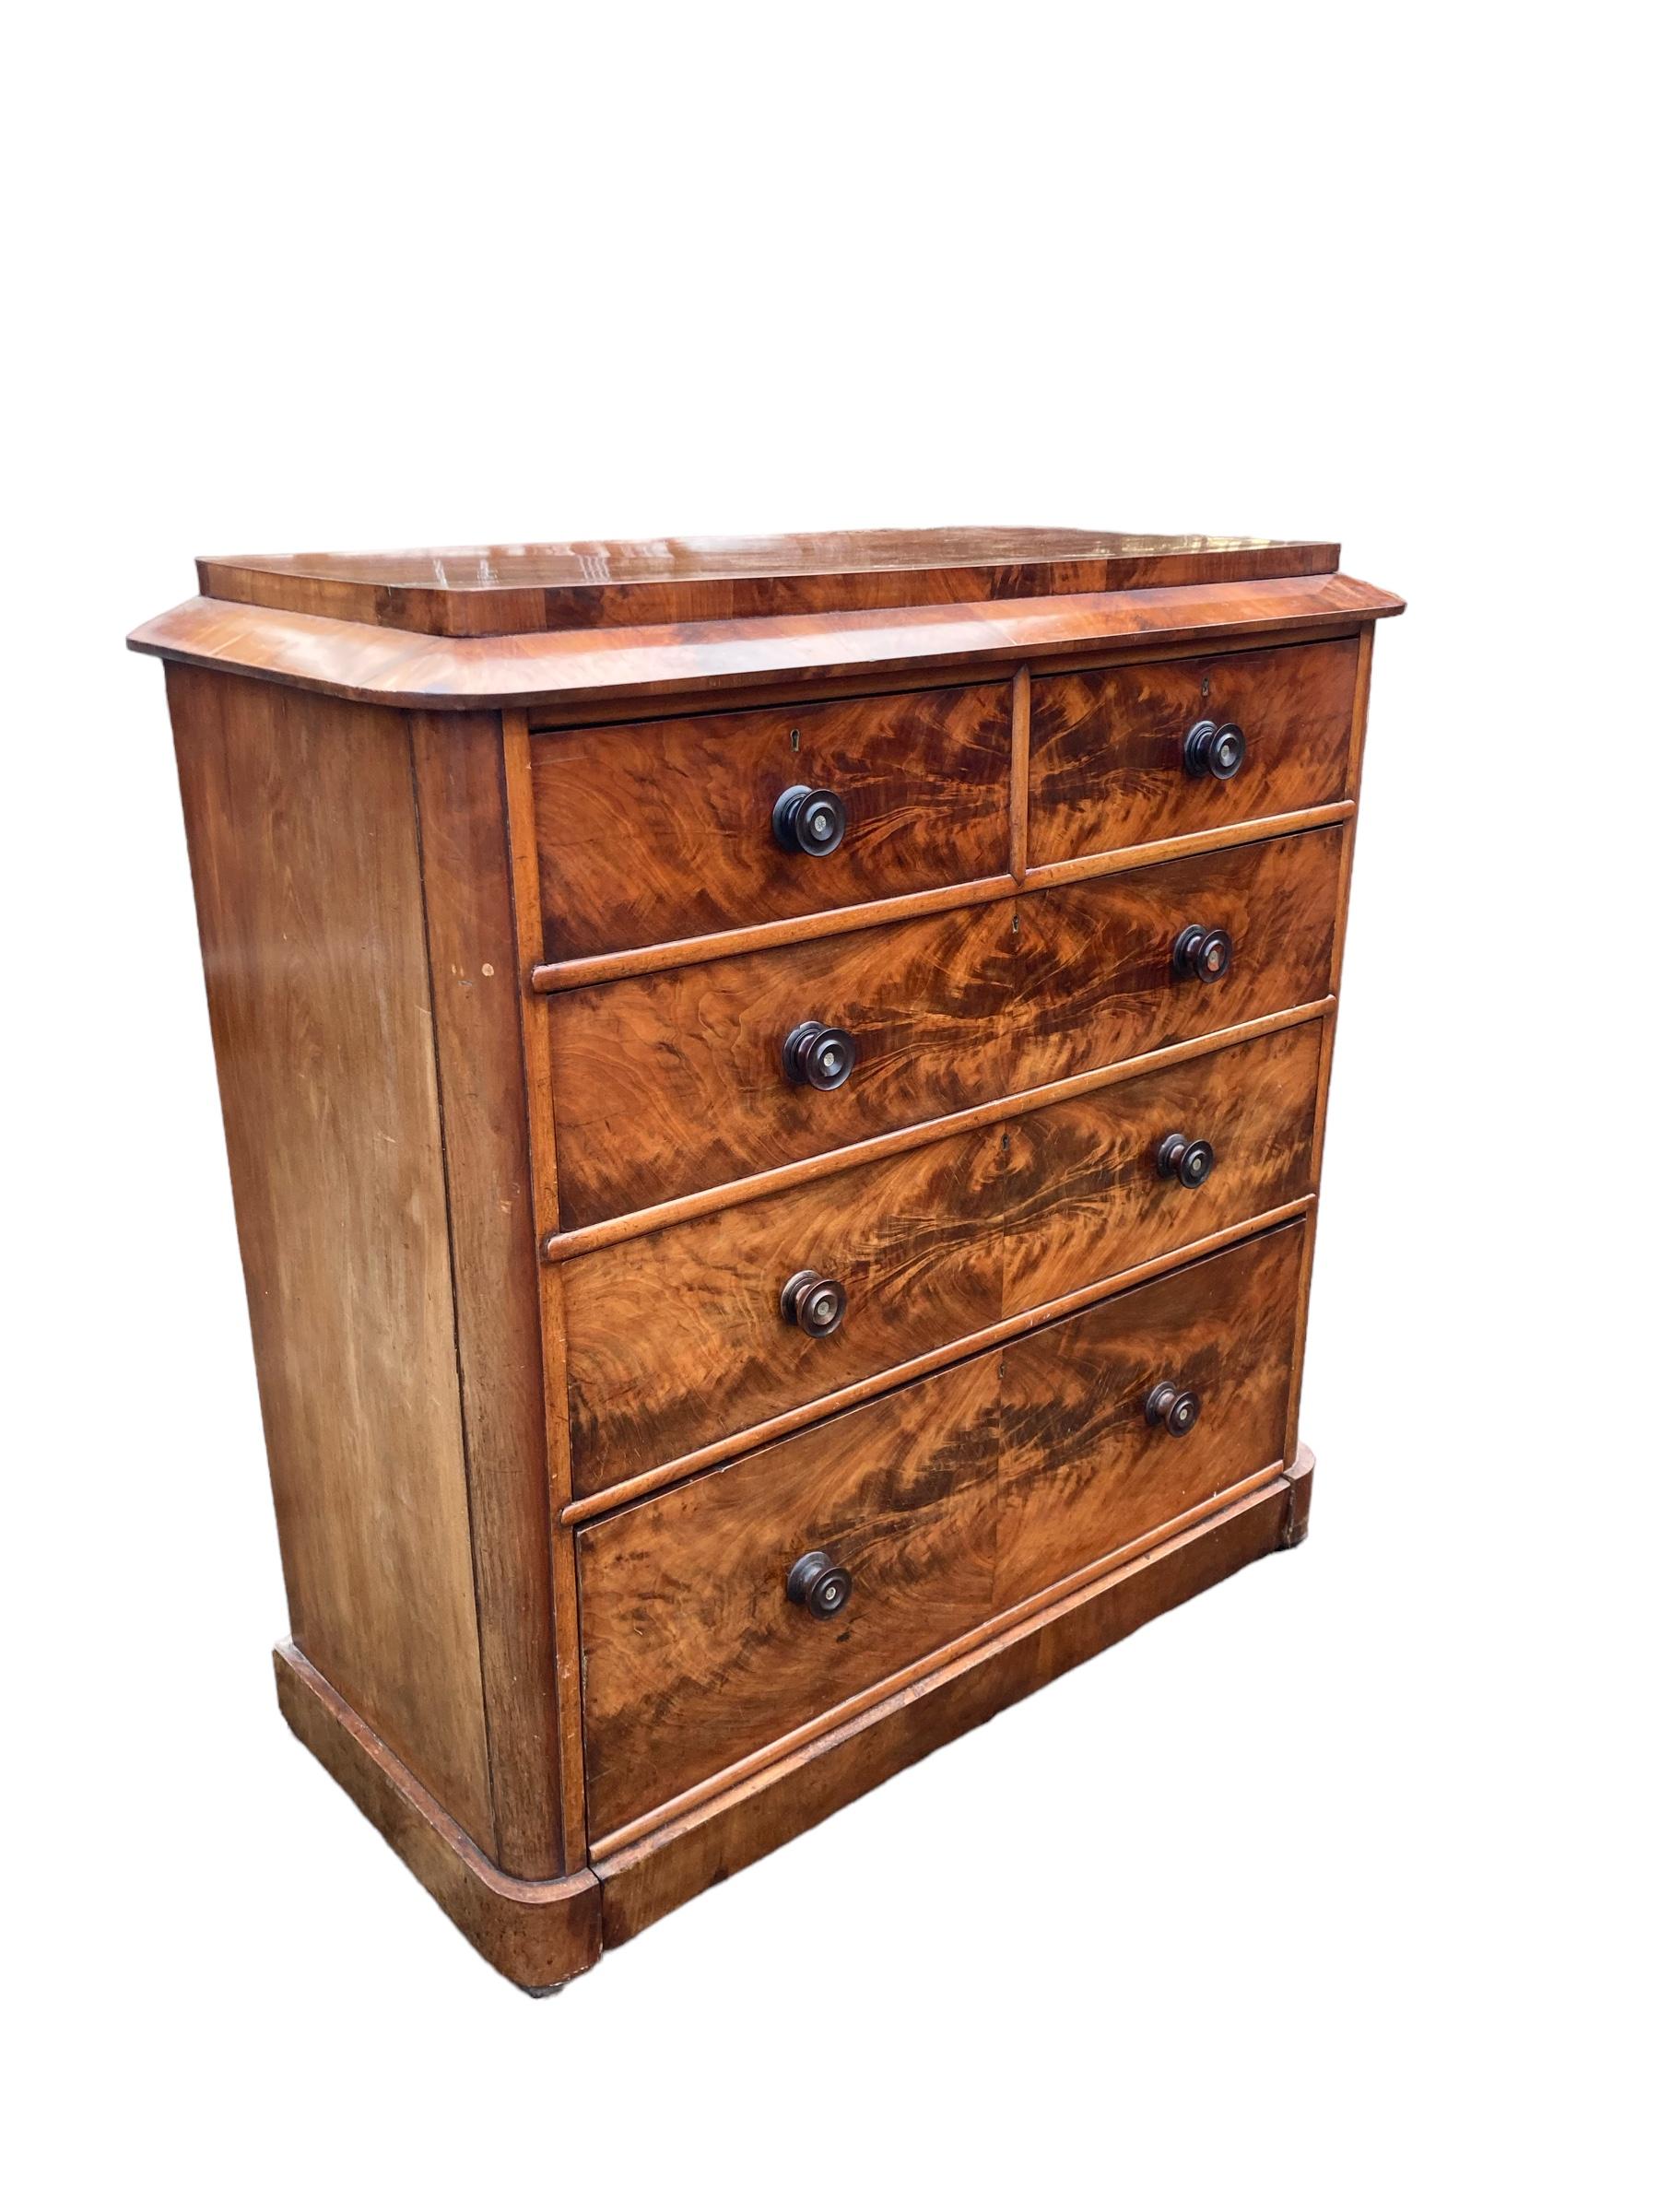 Large Victorian 2 over 3 Graduated Mahogany Chest of Drawers. Beautiful high grade pattern and Colouration to the wood, original back and handles. Bottom drawer built into the plynth, typical of a late 19th Century design. A classic example of this